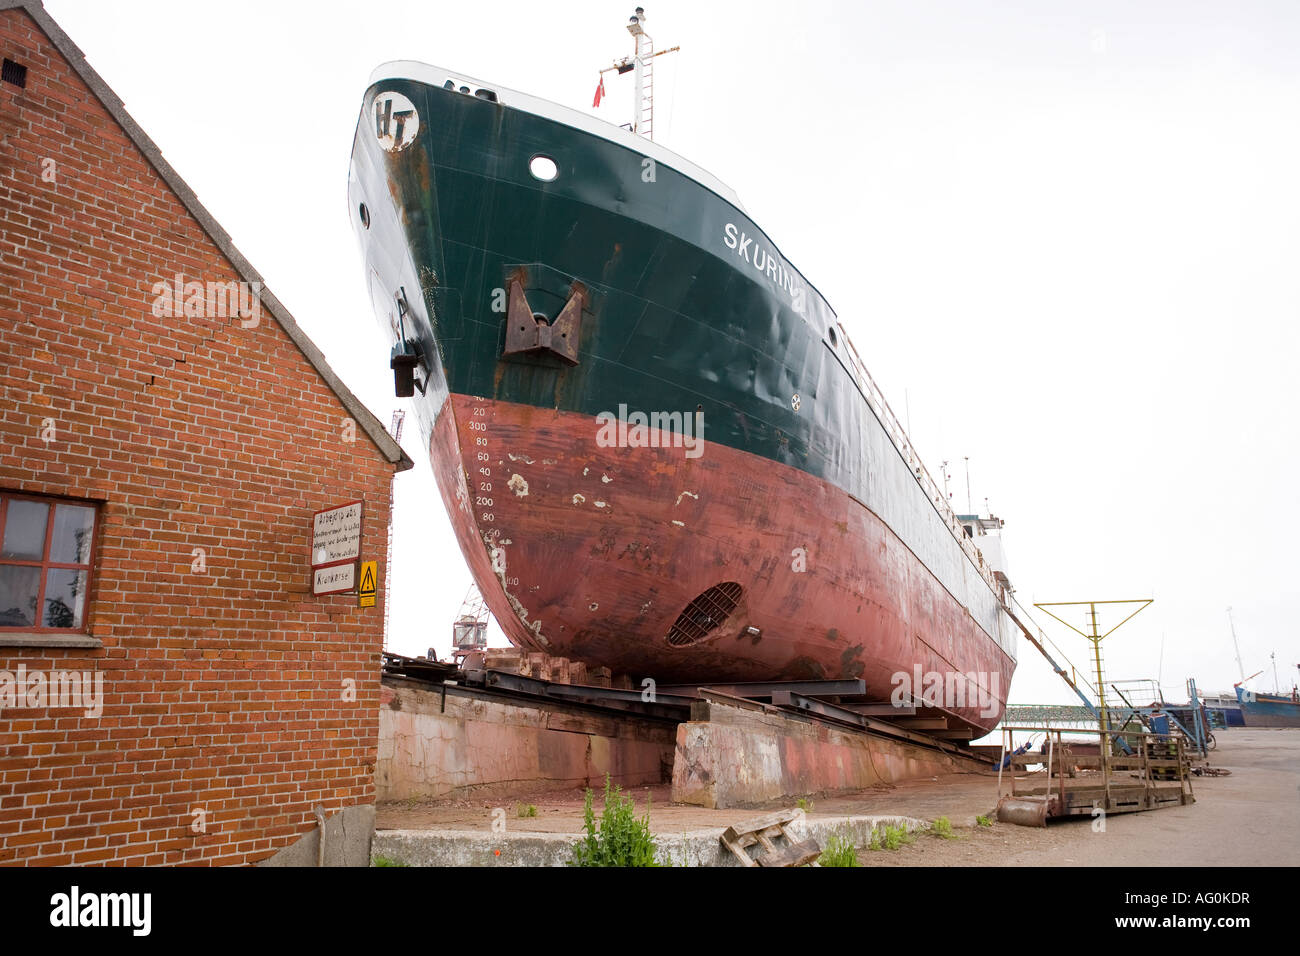 Skurin at Dry Dock A large old ocean freighter its bow thrusters and anchors showing pulled up in drydock Stock Photo